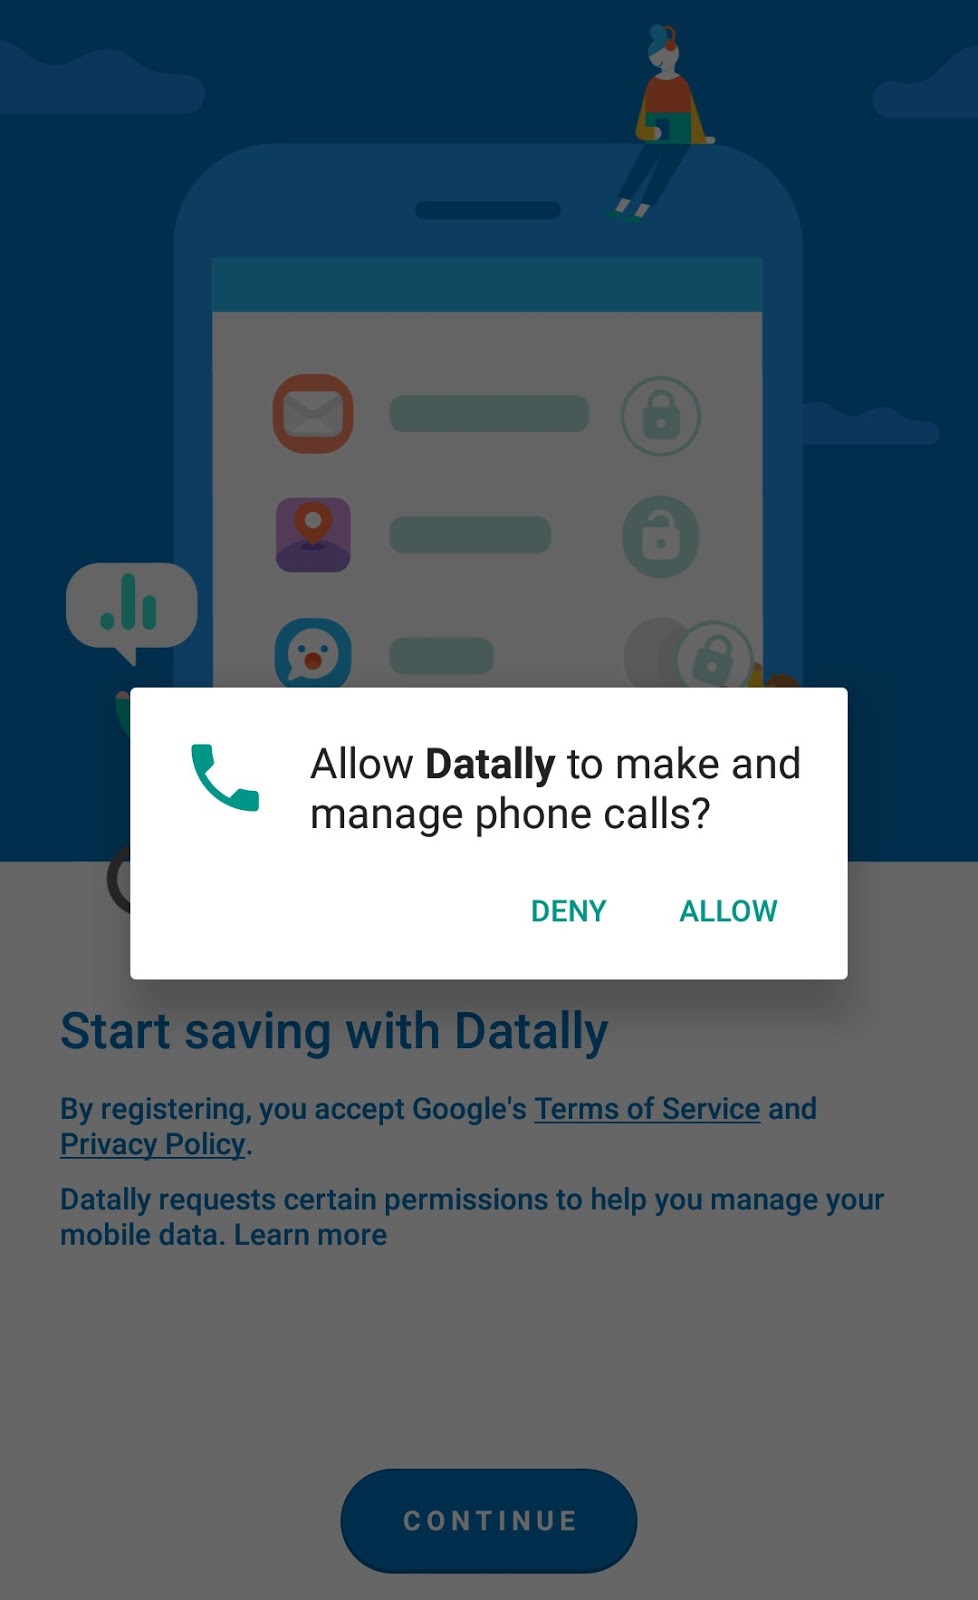 Setting the permissions for Google's Datally